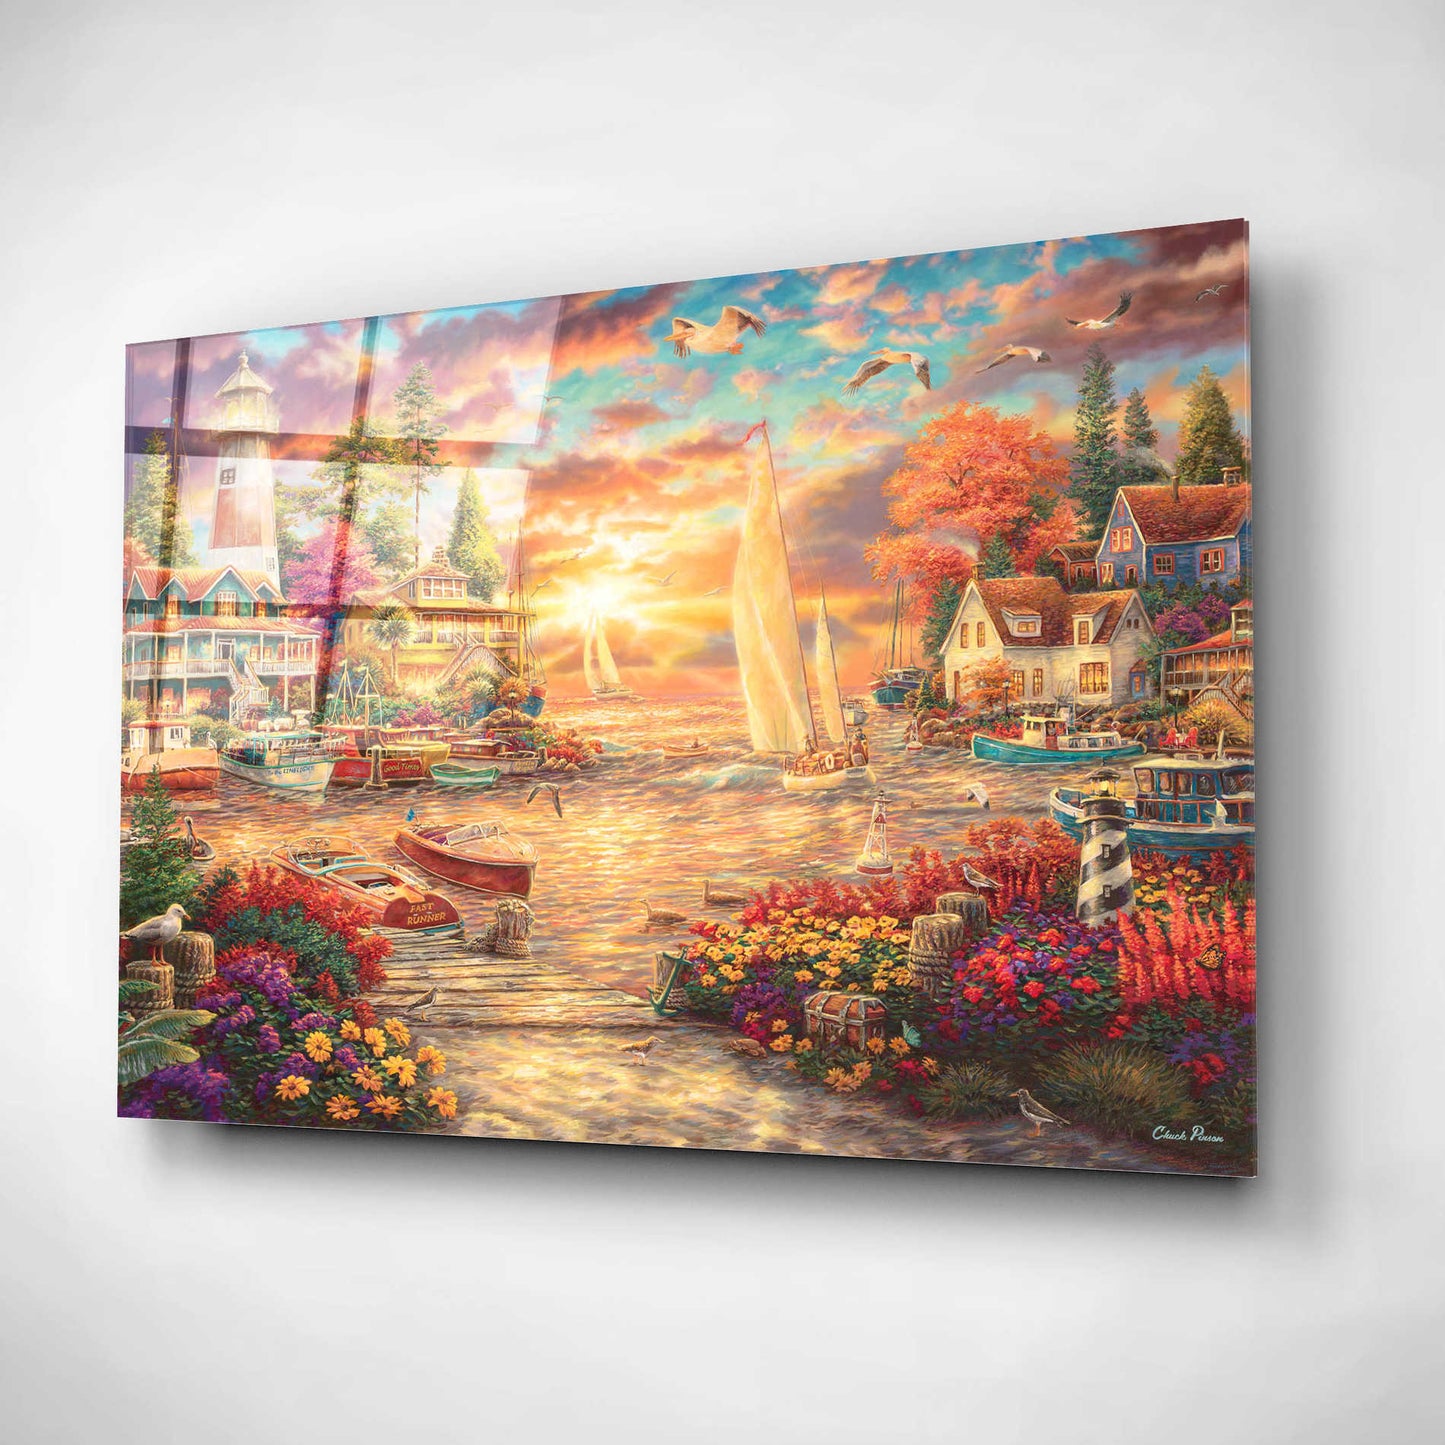 Epic Art 'Into the Sunset' by Chuck Pinson, Acrylic Glass Wall Art,24x16